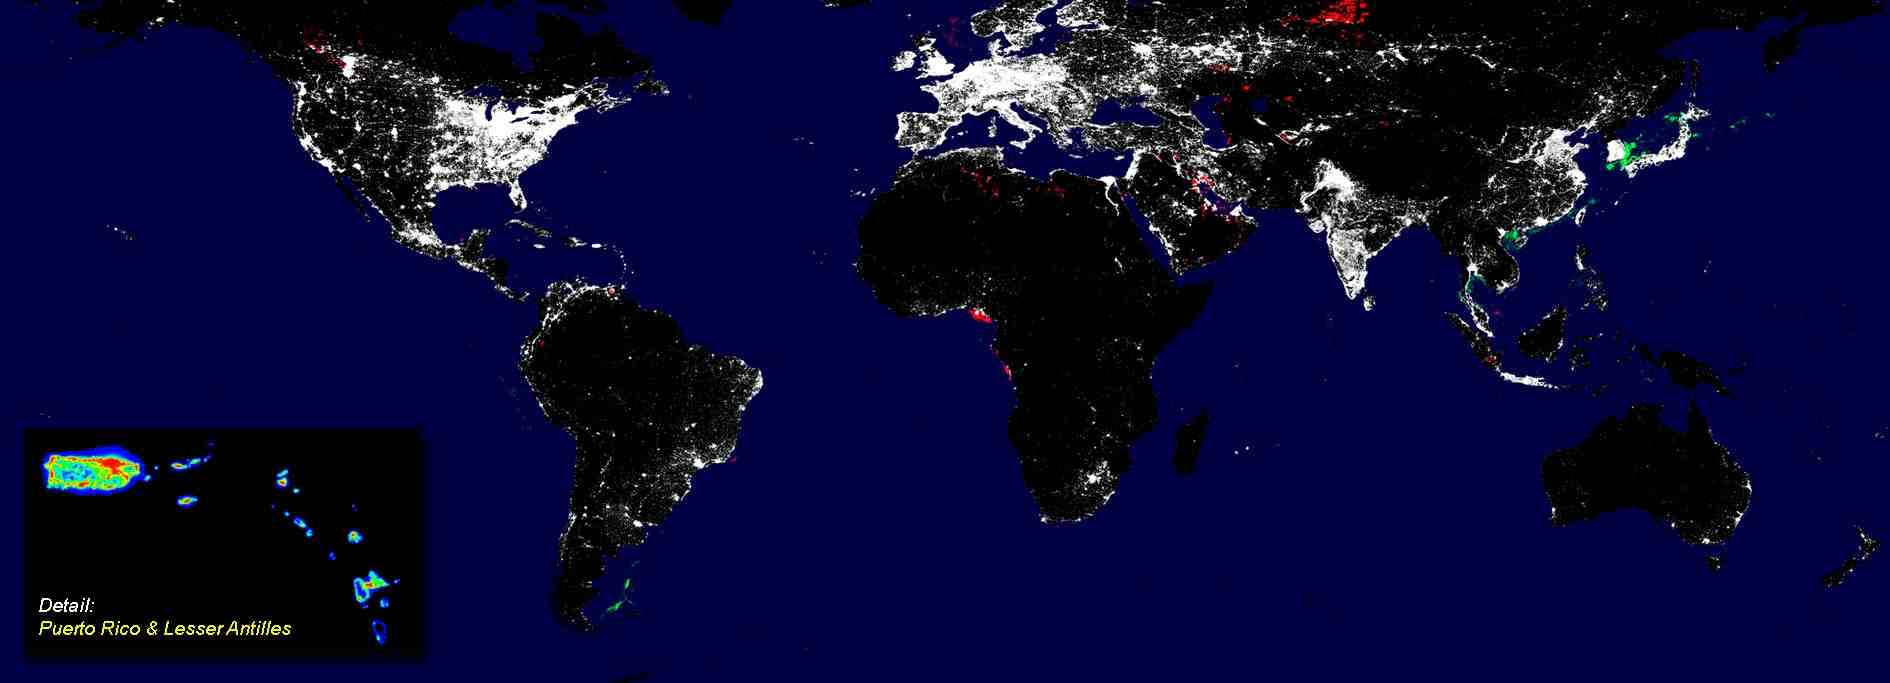 Figure 1. DMSP nighttime lights (White: Cities, Red: Gas flares, Blue: Fishing boats); Inset: Light Intensity of Puerto Rico and the Lesser Antilles